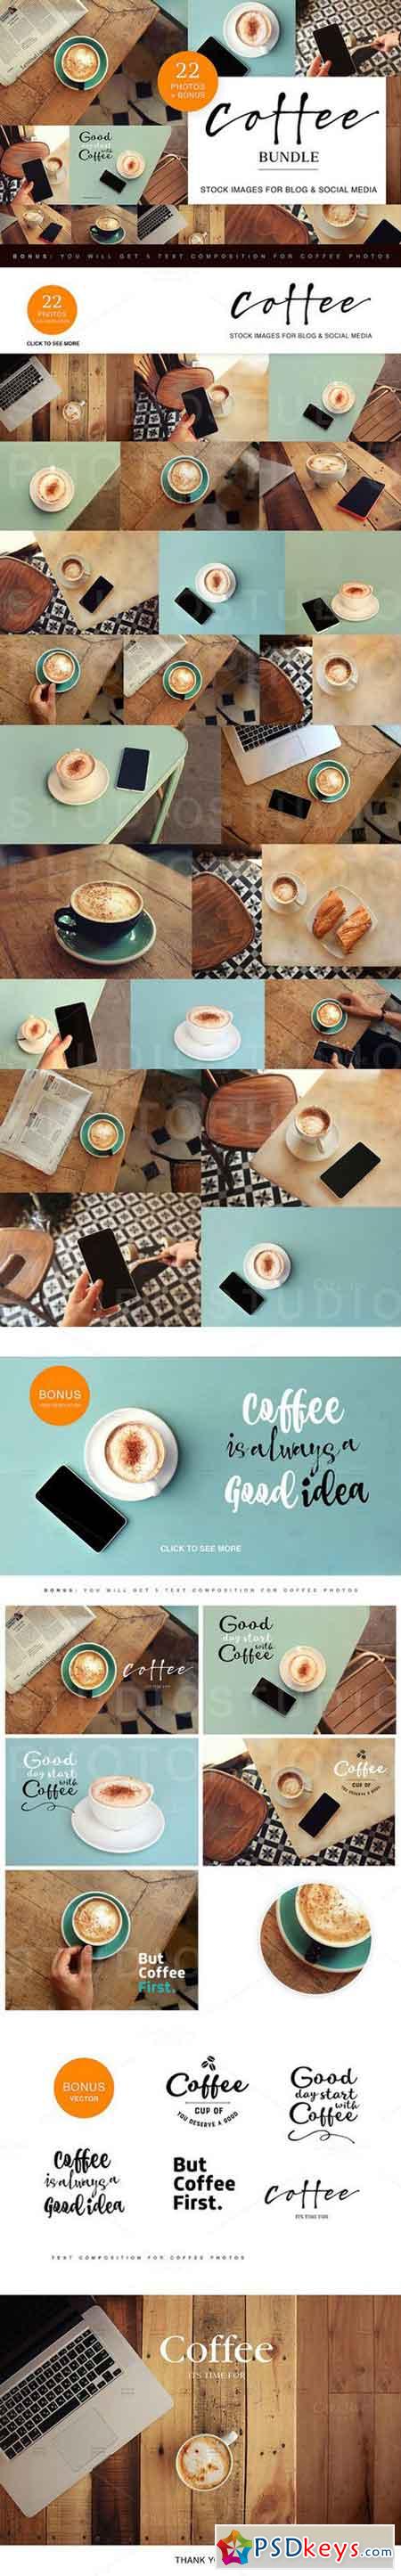 Coffee bundle Images for Blogs 864080